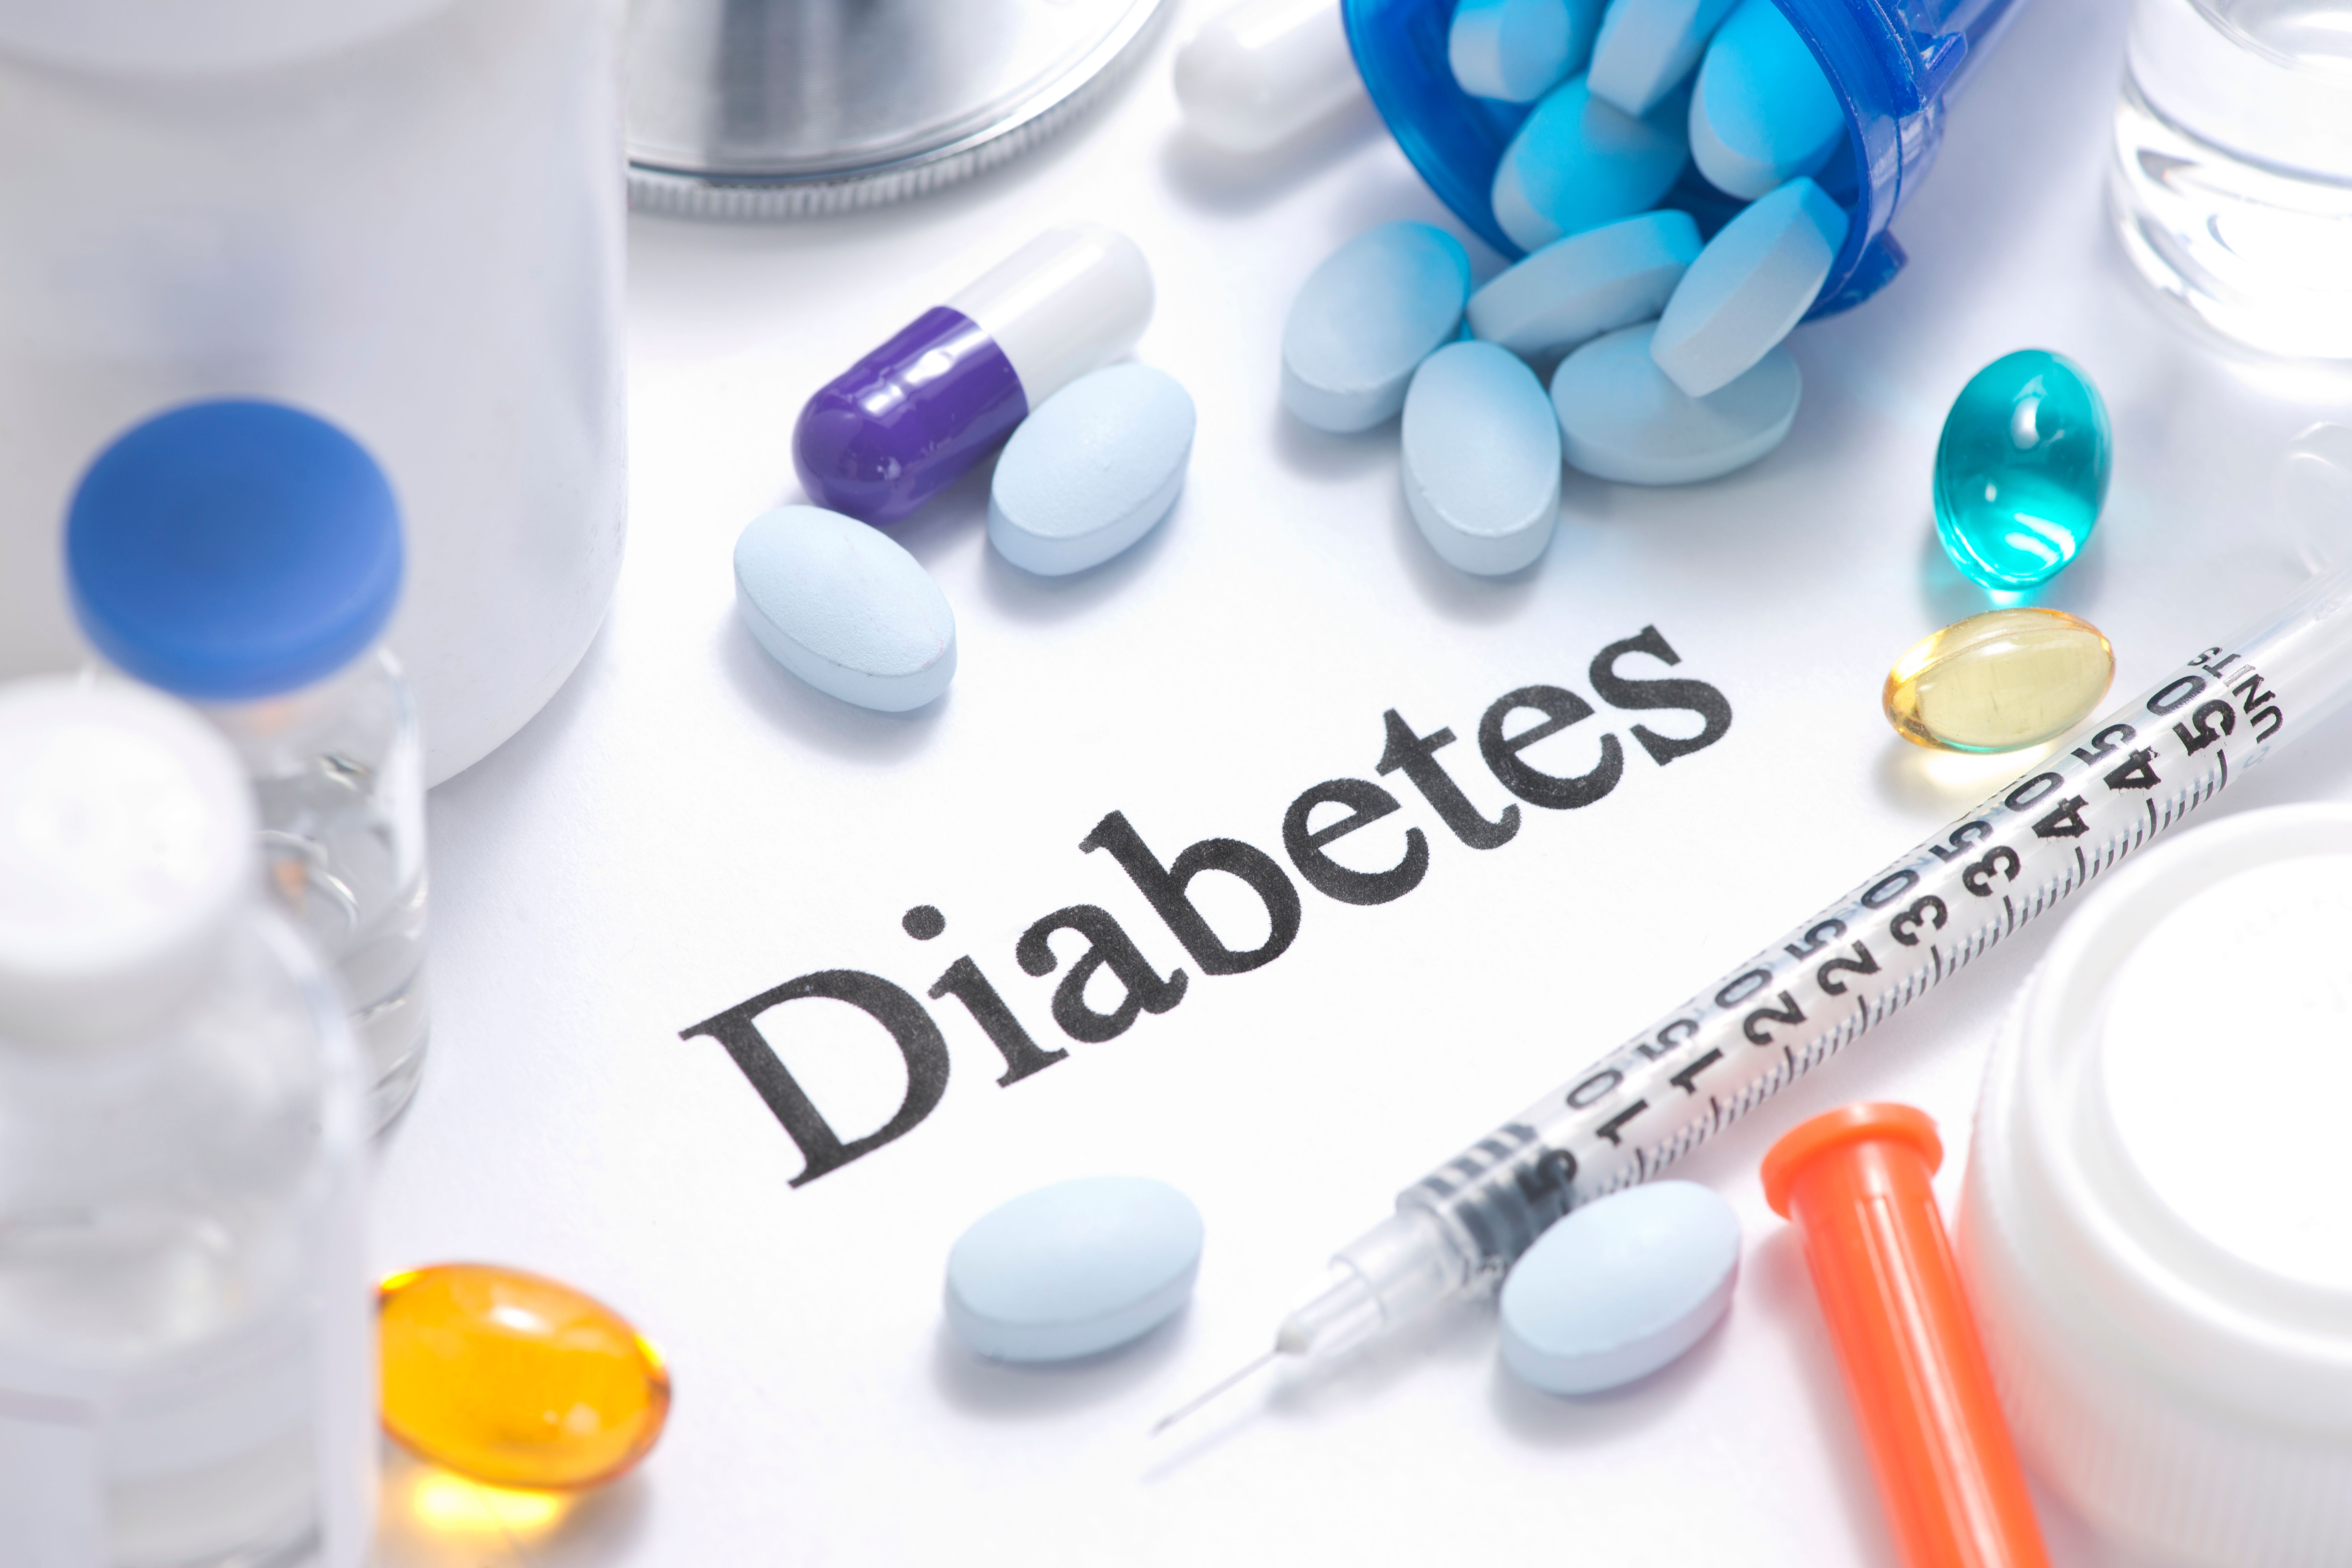  Study highlights challenges of providing diabetes care to rural patients 